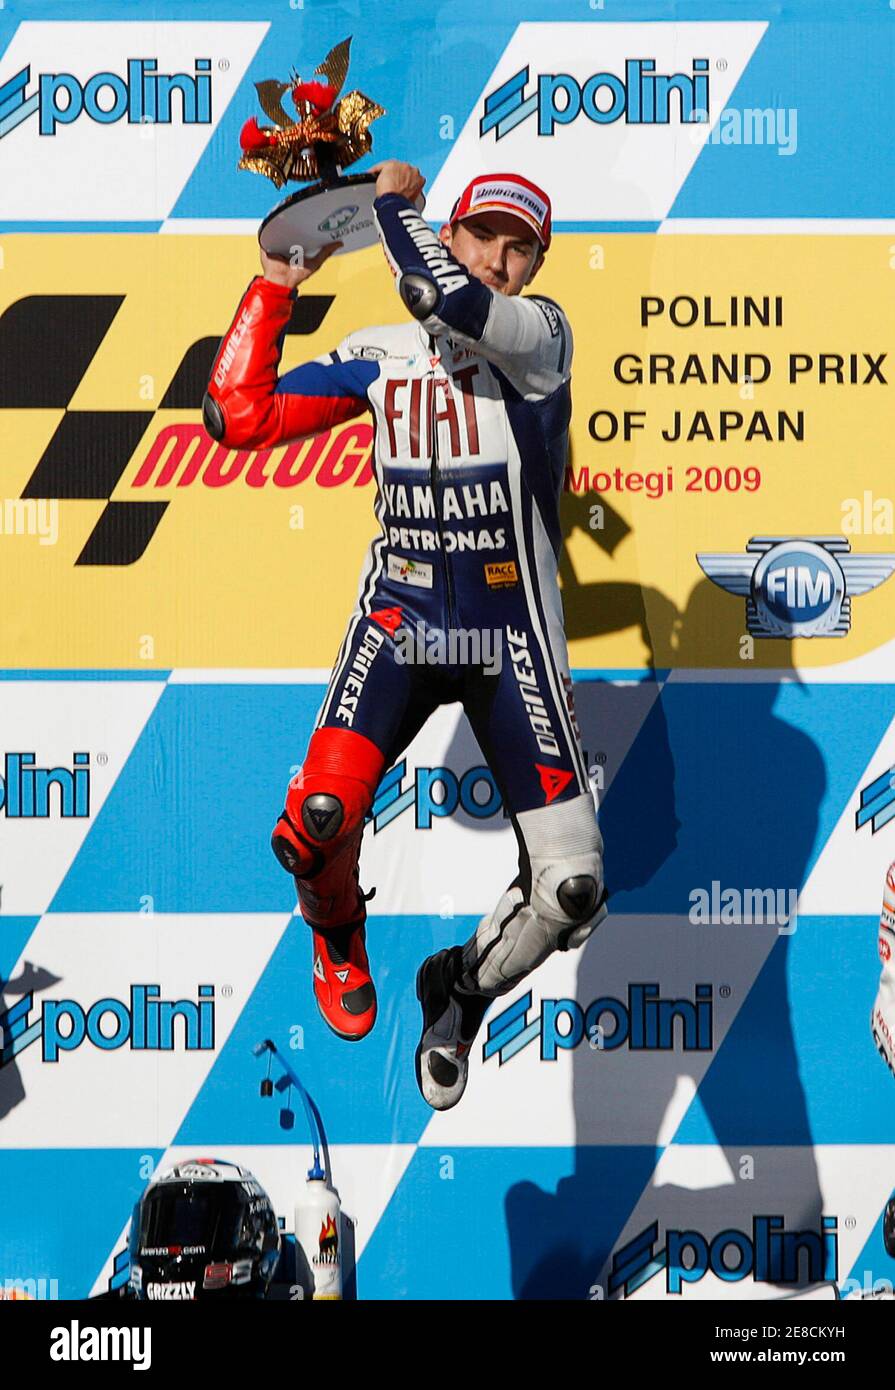 Yamaha MotoGP rider Jorge Lorenzo (C) of Spain jumps as he celebrates his  victory on the podium after the final of the Japanese Grand Prix in Motegi,  north of Tokyo April 26,